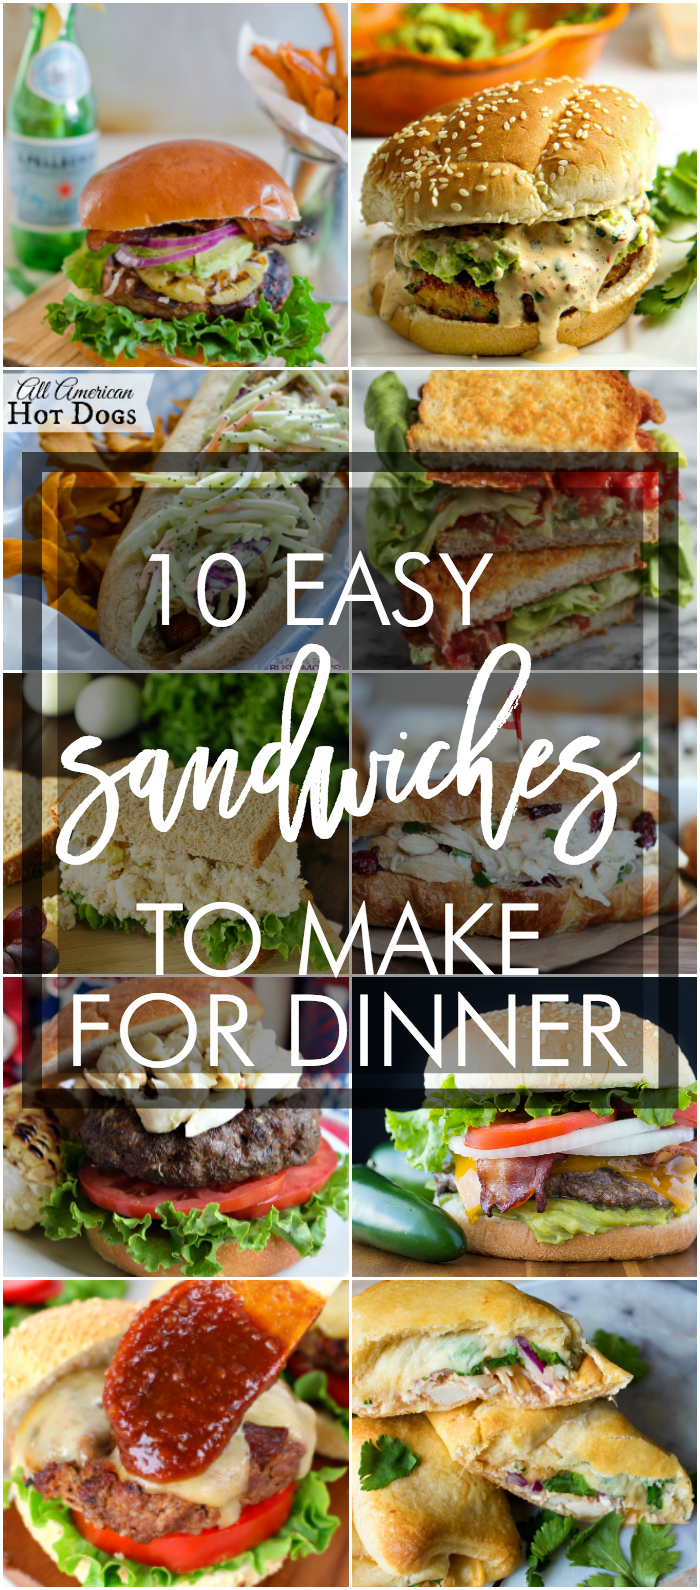 10 easy sandwich recipes to make for dinner. Simple sandwich ideas. Love these!